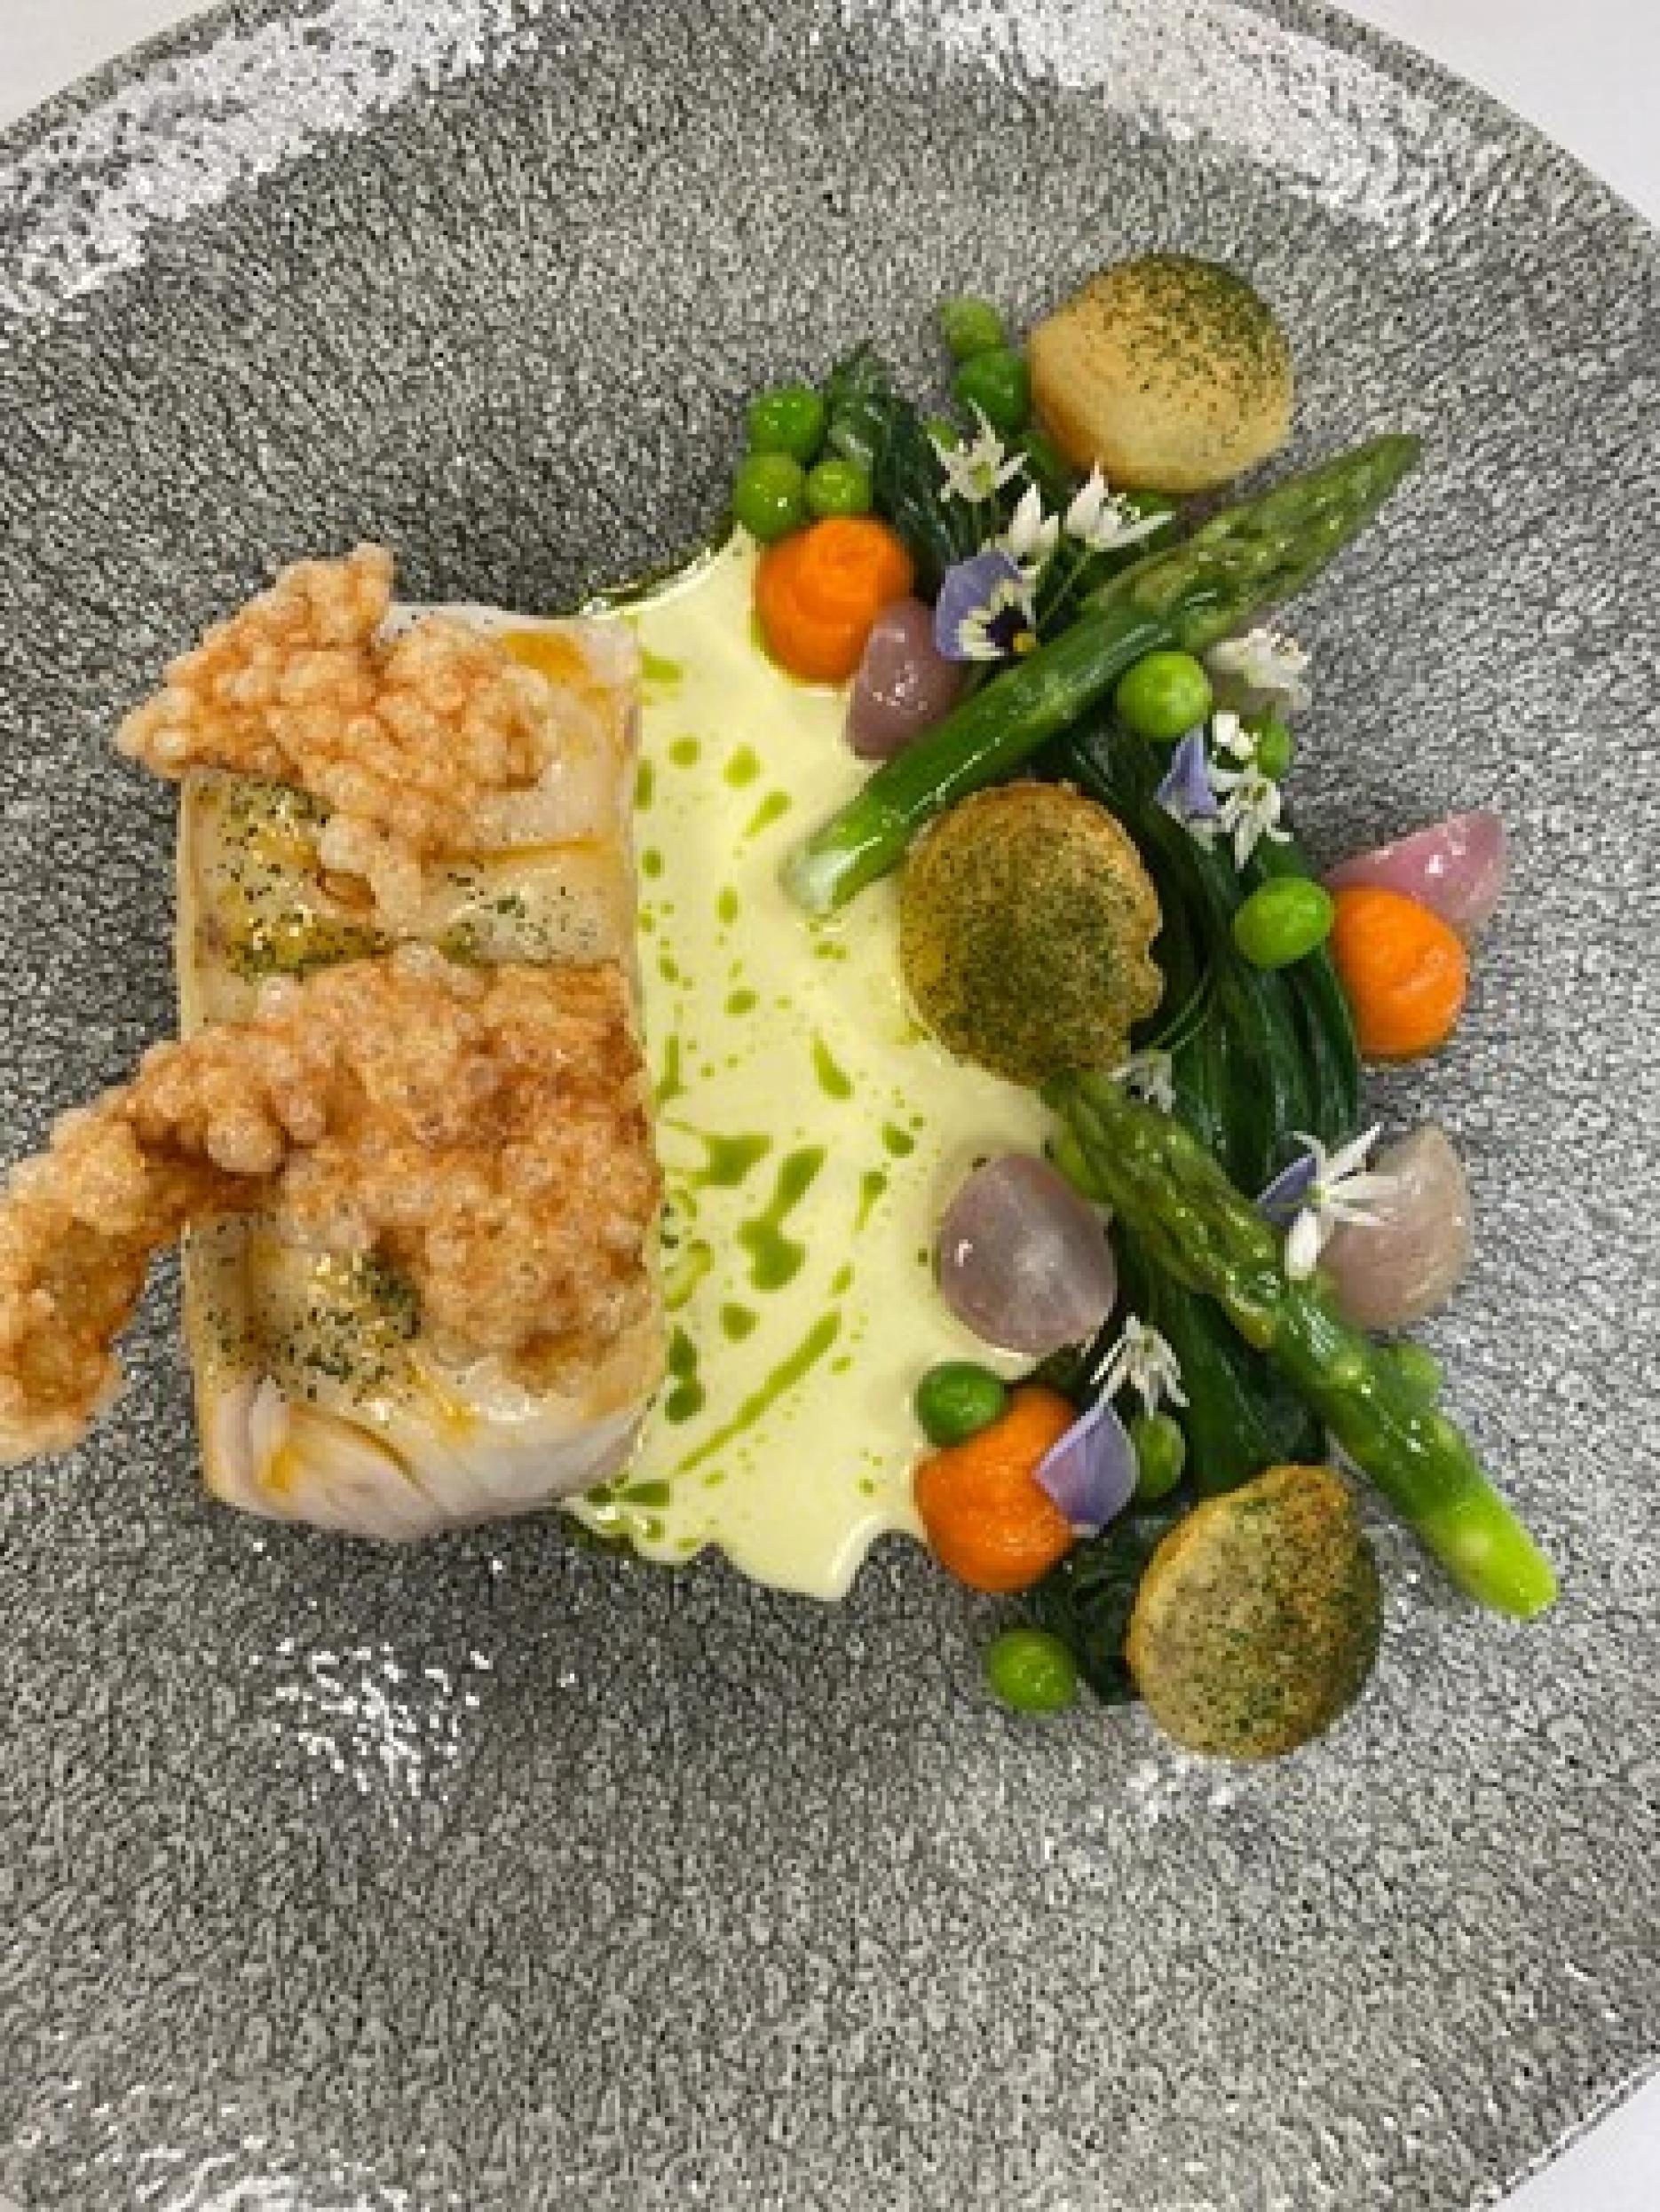 Charlie’s dish is a cod poached in lobster butter, lobster tapioca crisp, seasonal vegetables, pomme souffles, carrot puree and split butter sauce.